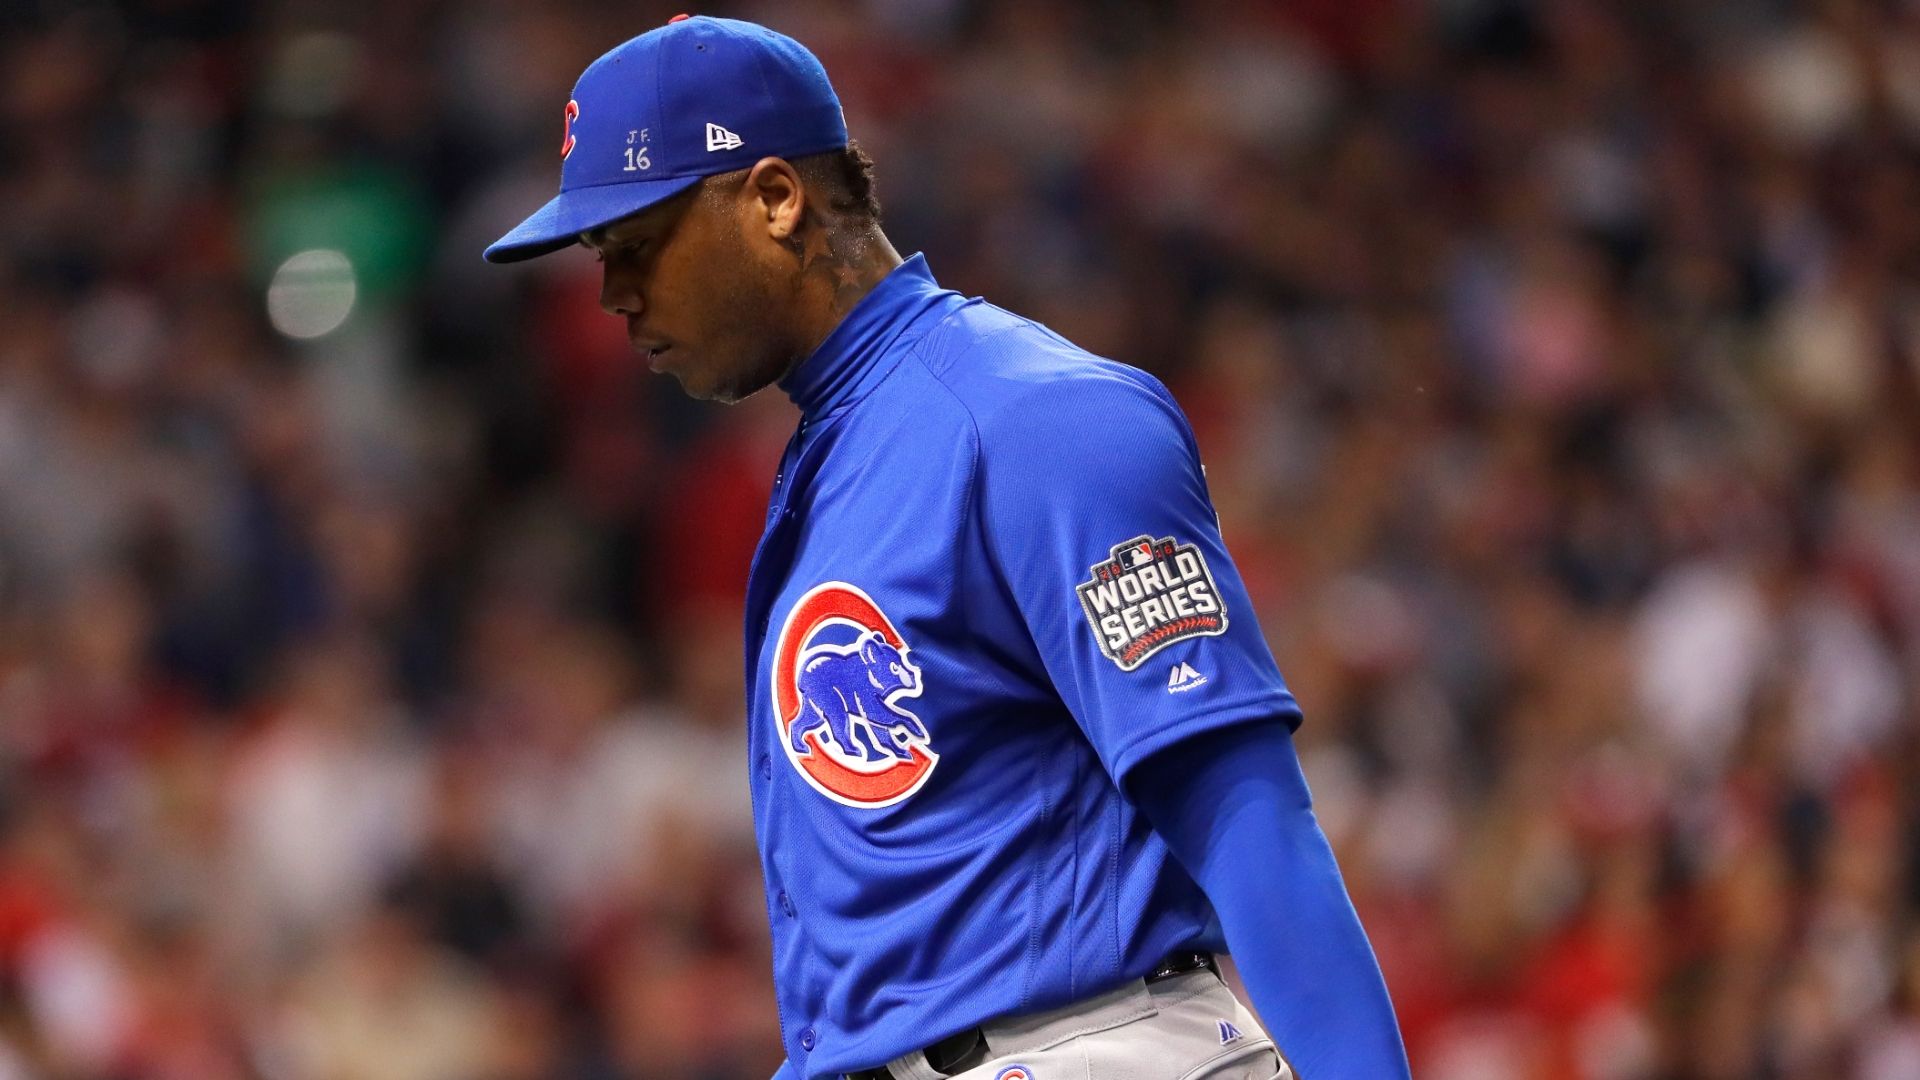 Should Maddon have played Chapman in the ninth inning?